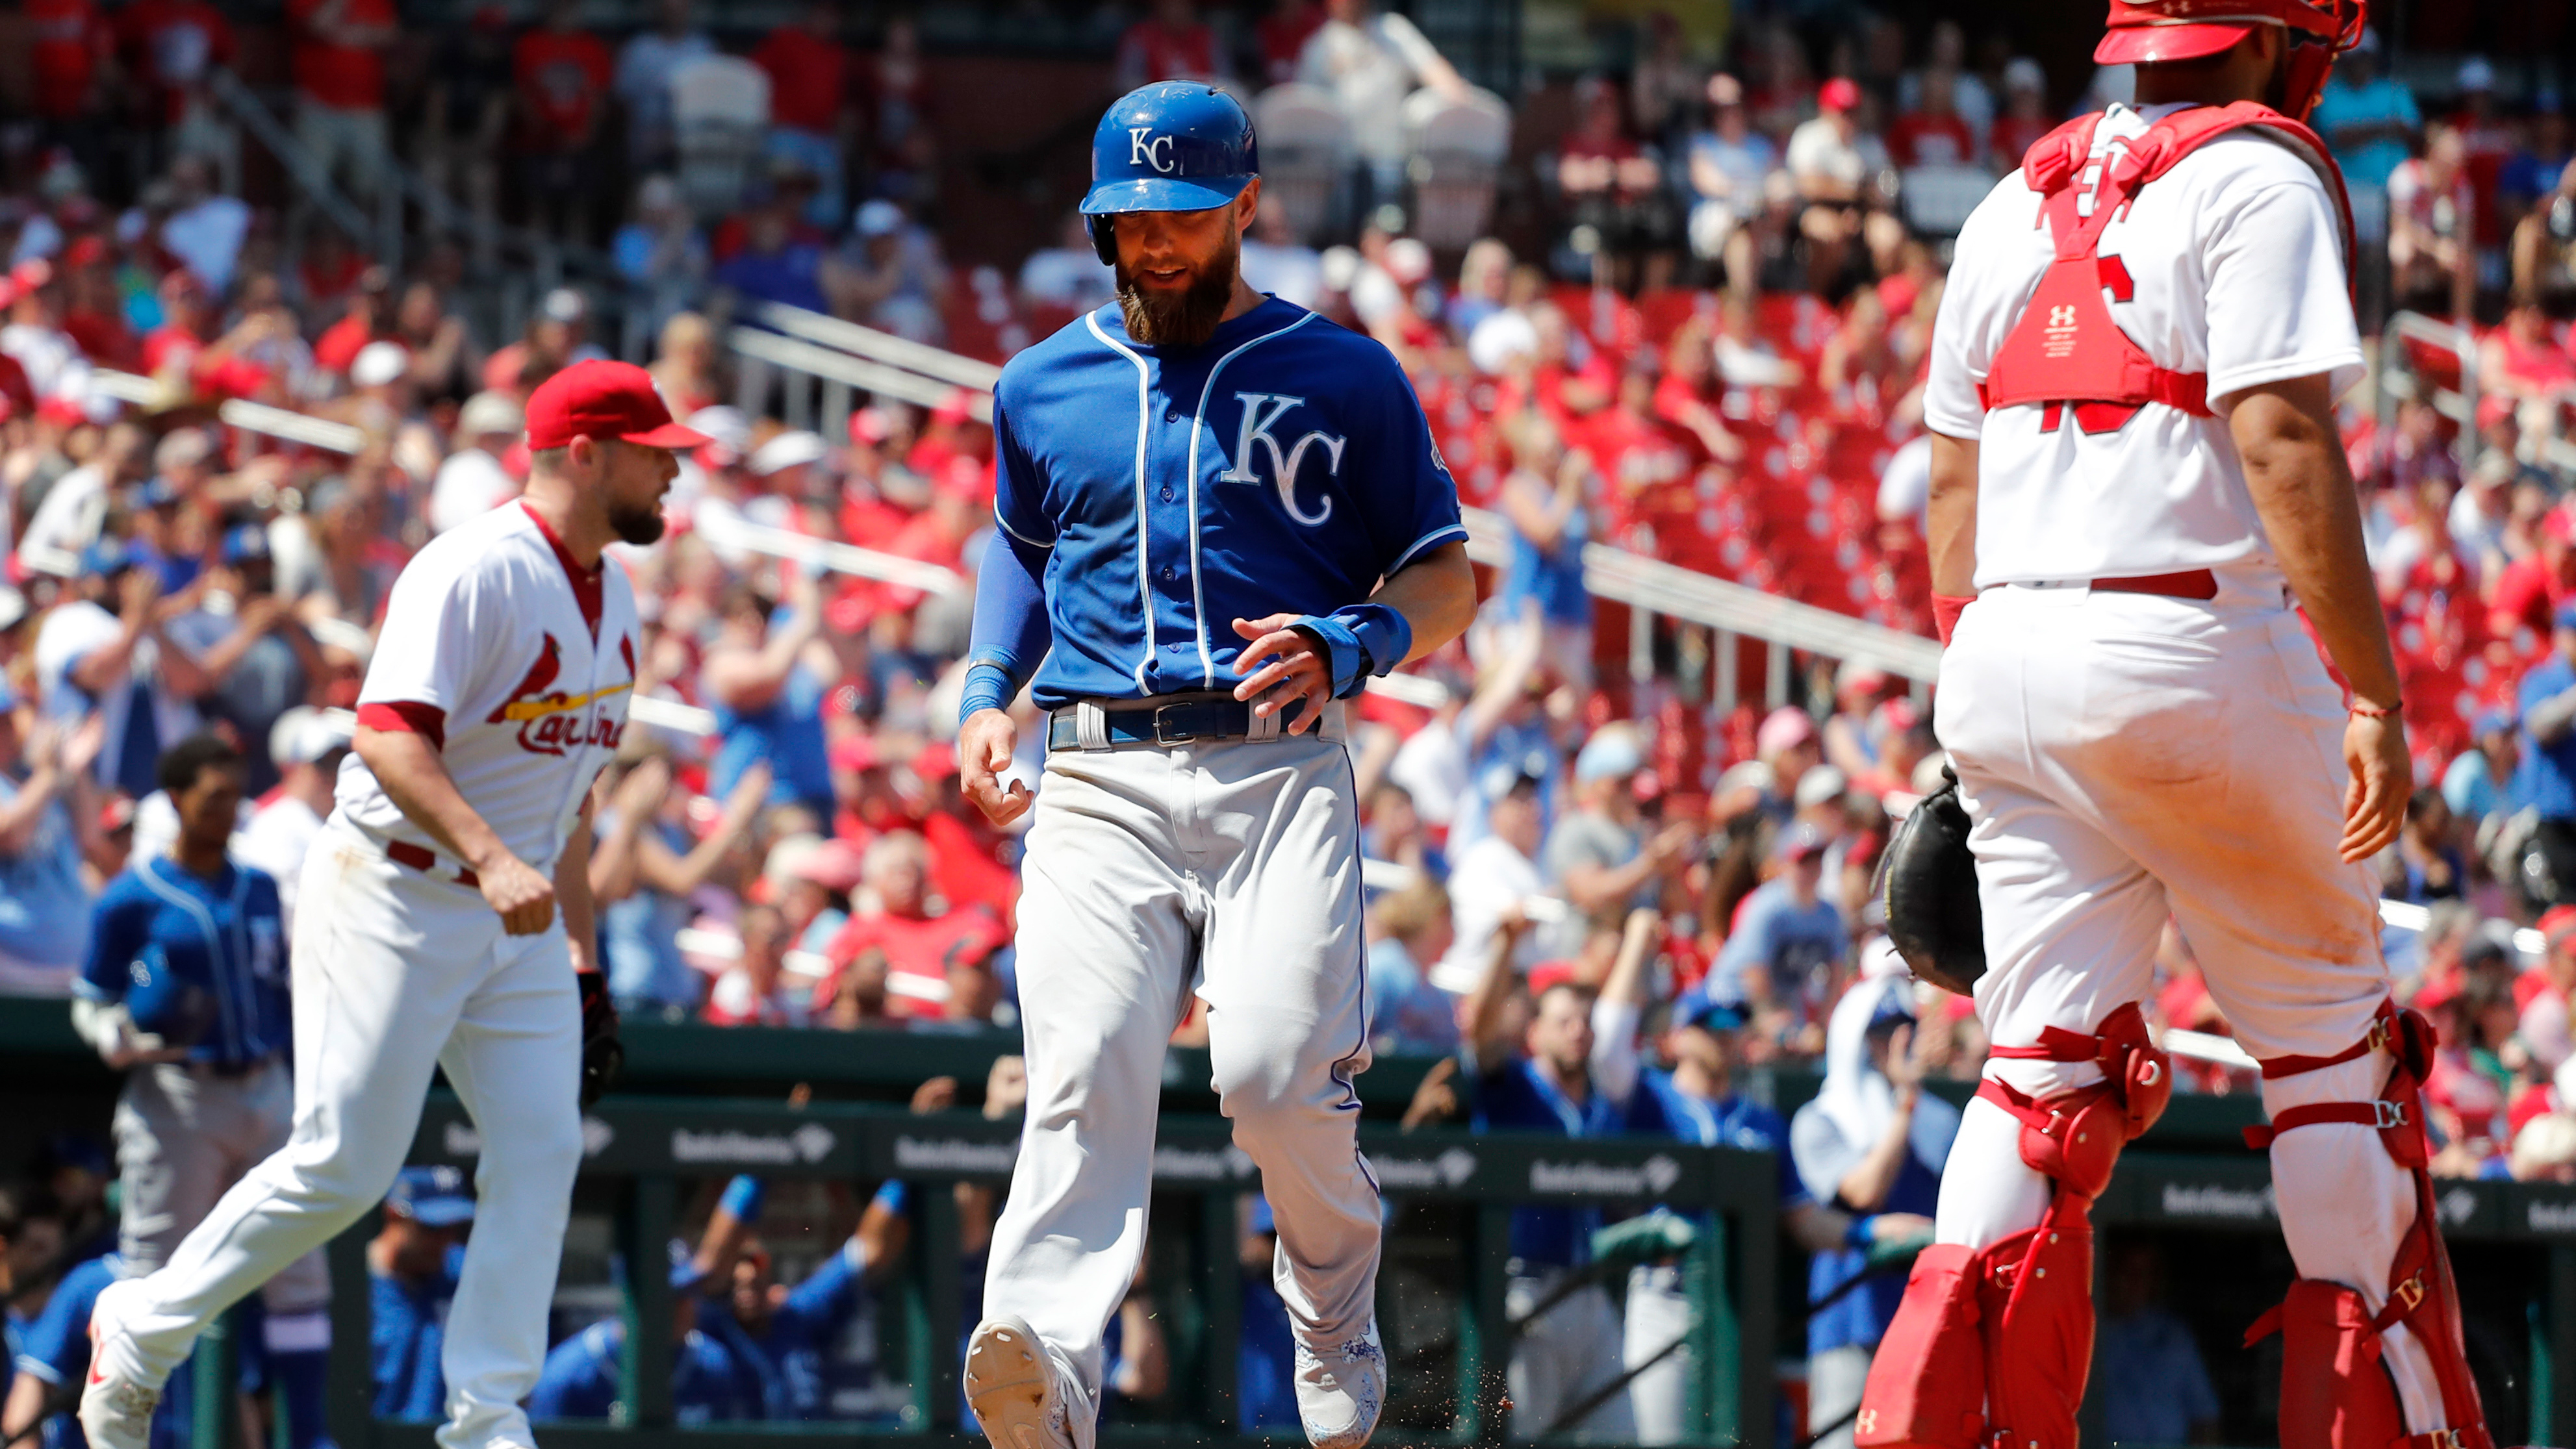 Cardinals' Norris proves mortal in 10th as Royals rally for 5-2 win